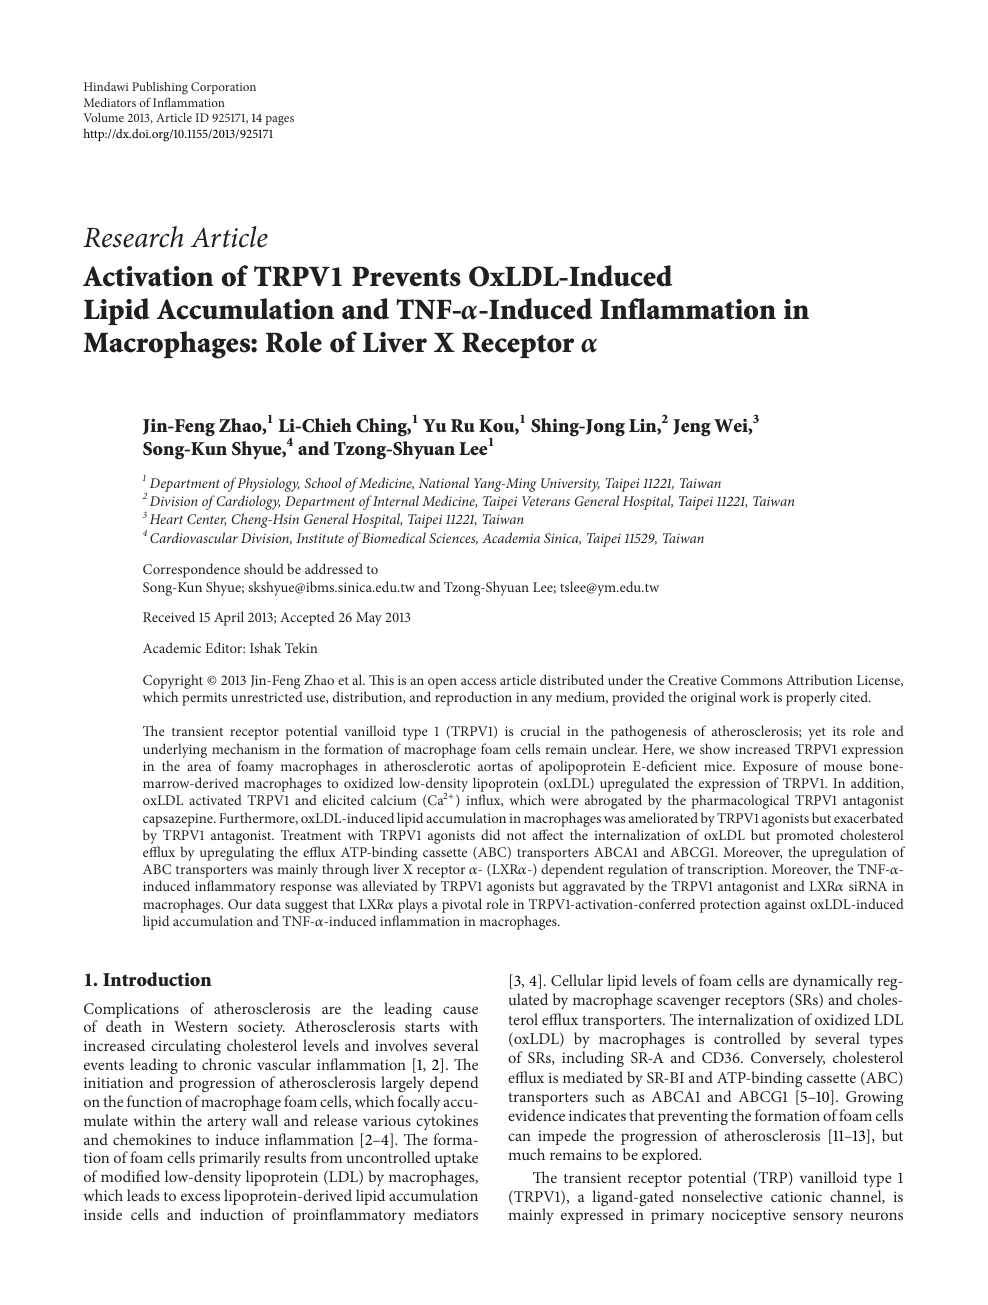 Activation Of Trpv1 Prevents Oxldl Induced Lipid Accumulation And Tnf A Induced Inflammation In Macrophages Role Of Liver X Receptor A Topic Of Research Paper In Biological Sciences Download Scholarly Article Pdf